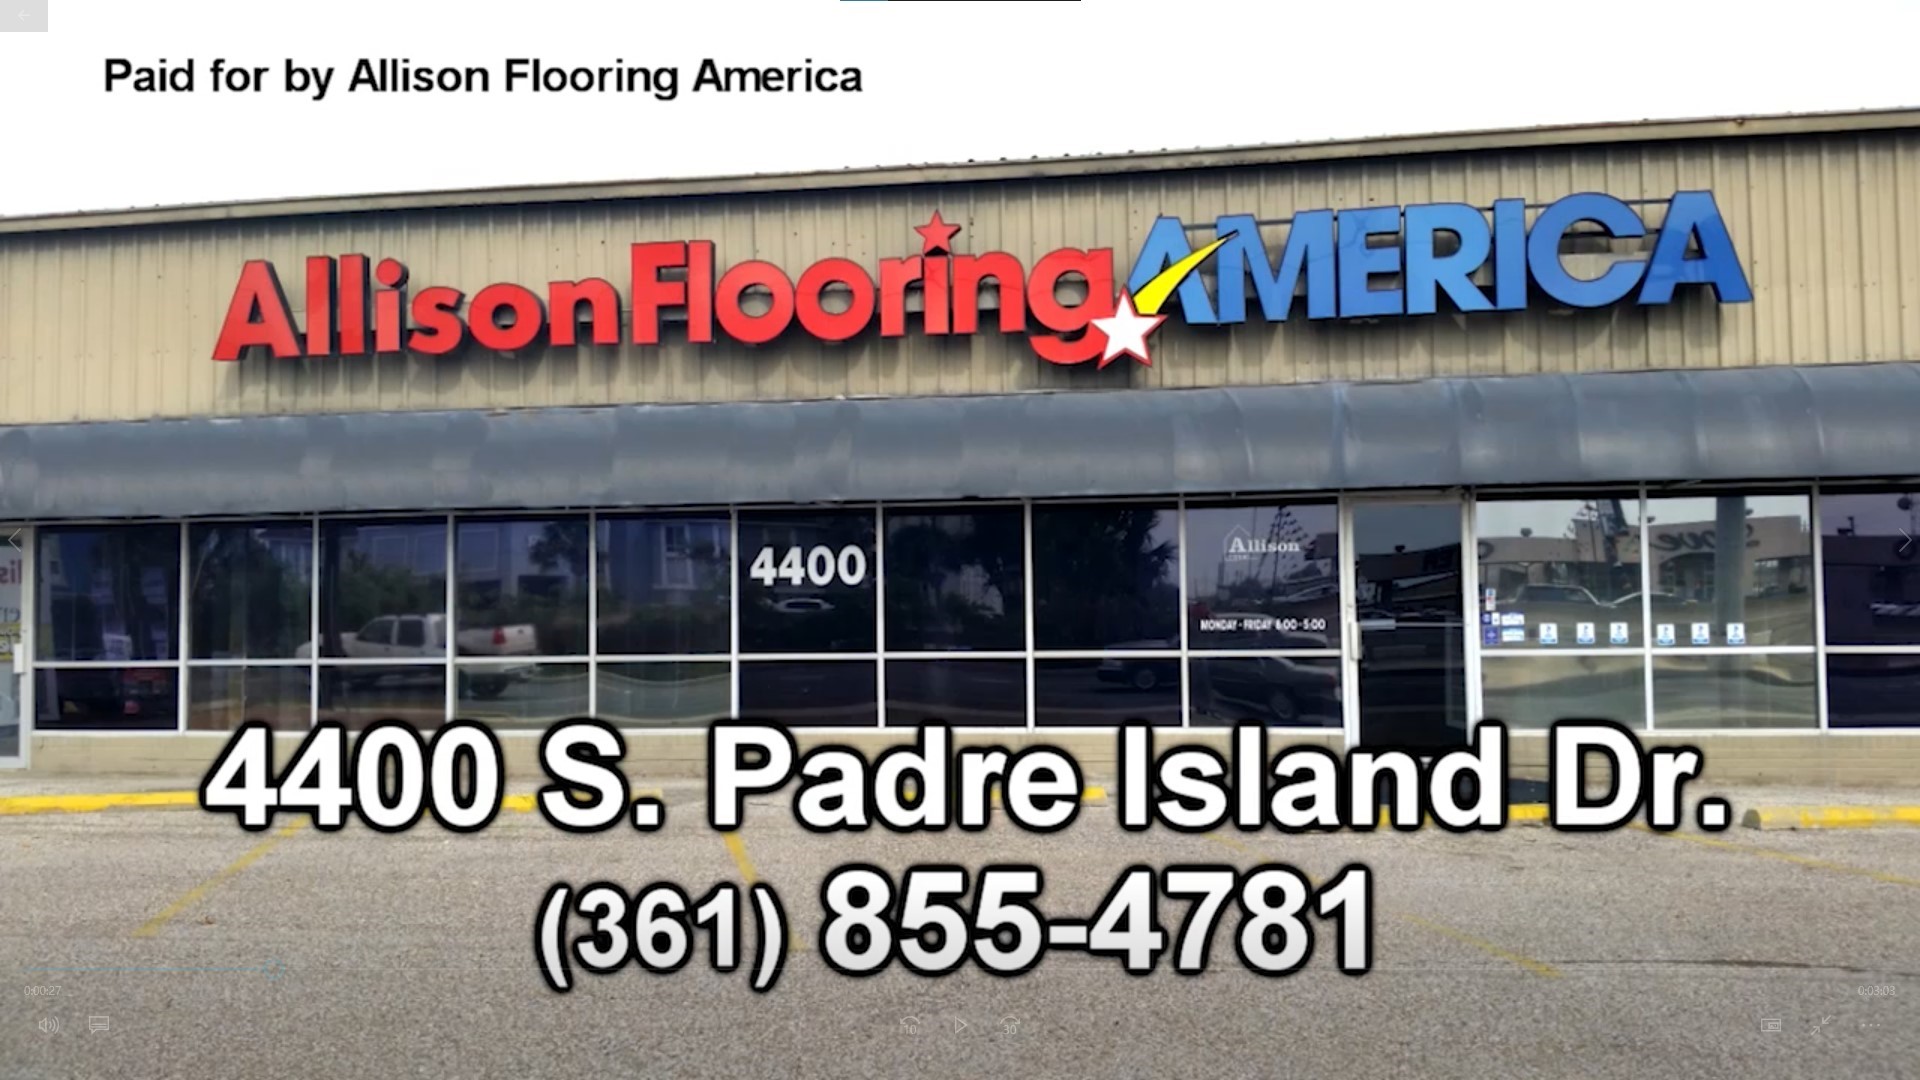 Around the Bend is a weekly sponsored segment featuring businesses in the Coastal Bend. In this segment, Allison Flooring America discusses waterproof flooring.